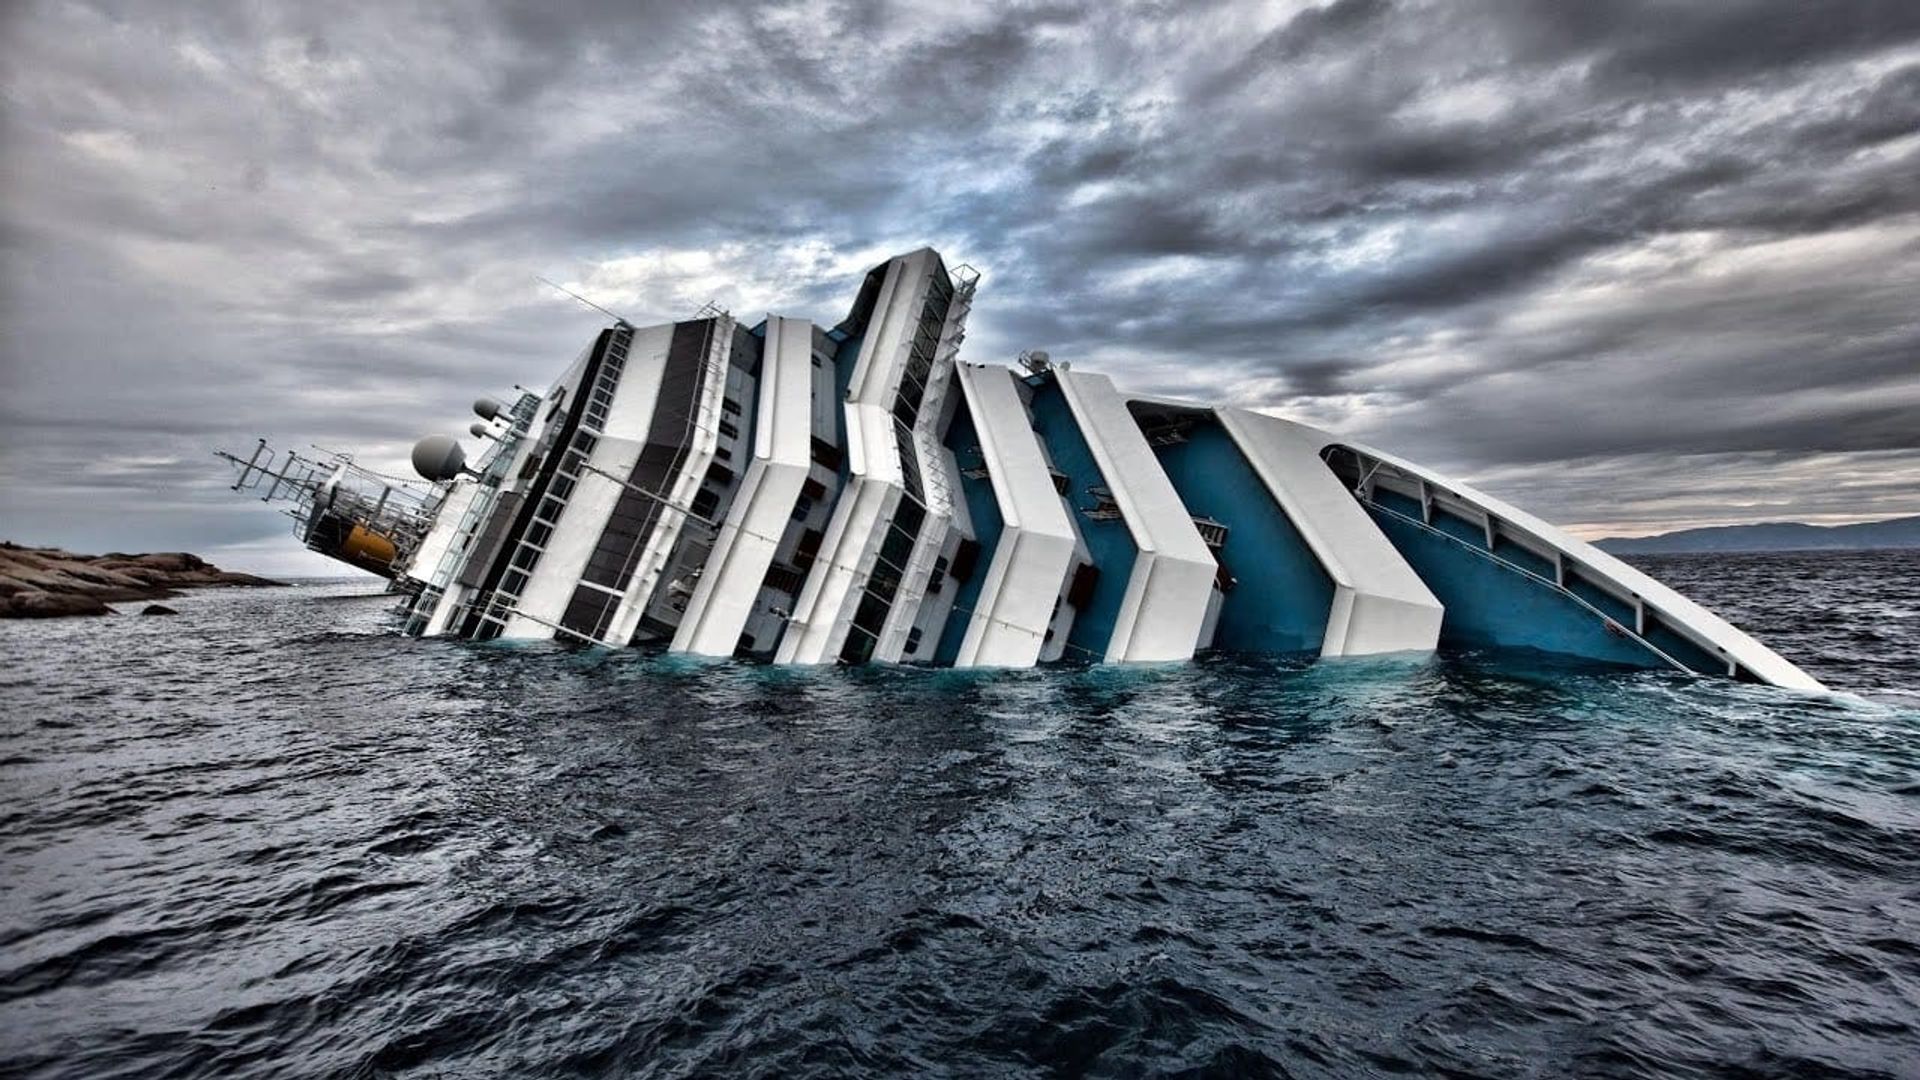 Terror at Sea: The Sinking of the Concordia background